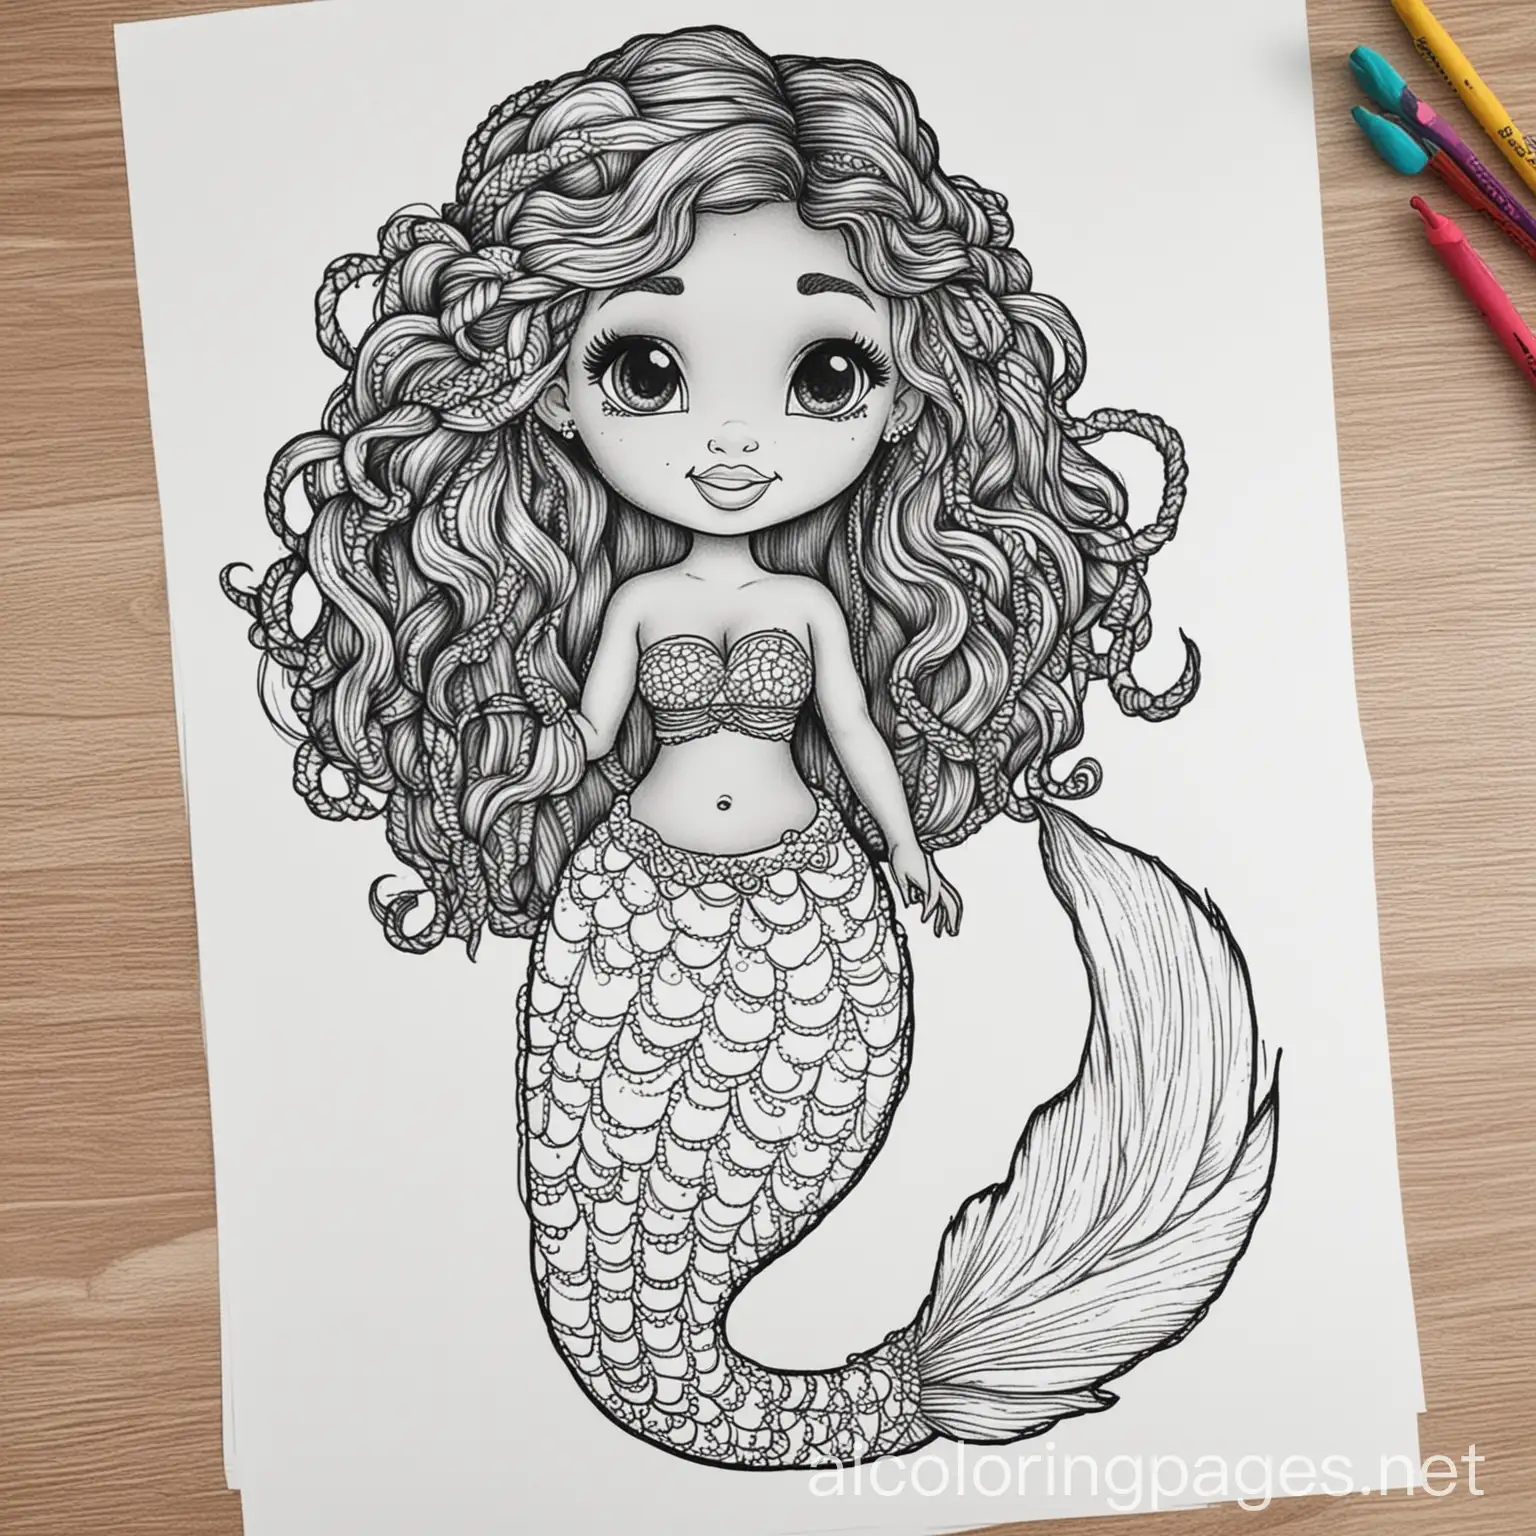 African American mermaid in black and white with braids coloring page with tail, Coloring Page, black and white, line art, white background, Simplicity, Ample White Space. The background of the coloring page is plain white to make it easy for young children to color within the lines. The outlines of all the subjects are easy to distinguish, making it simple for kids to color without too much difficulty